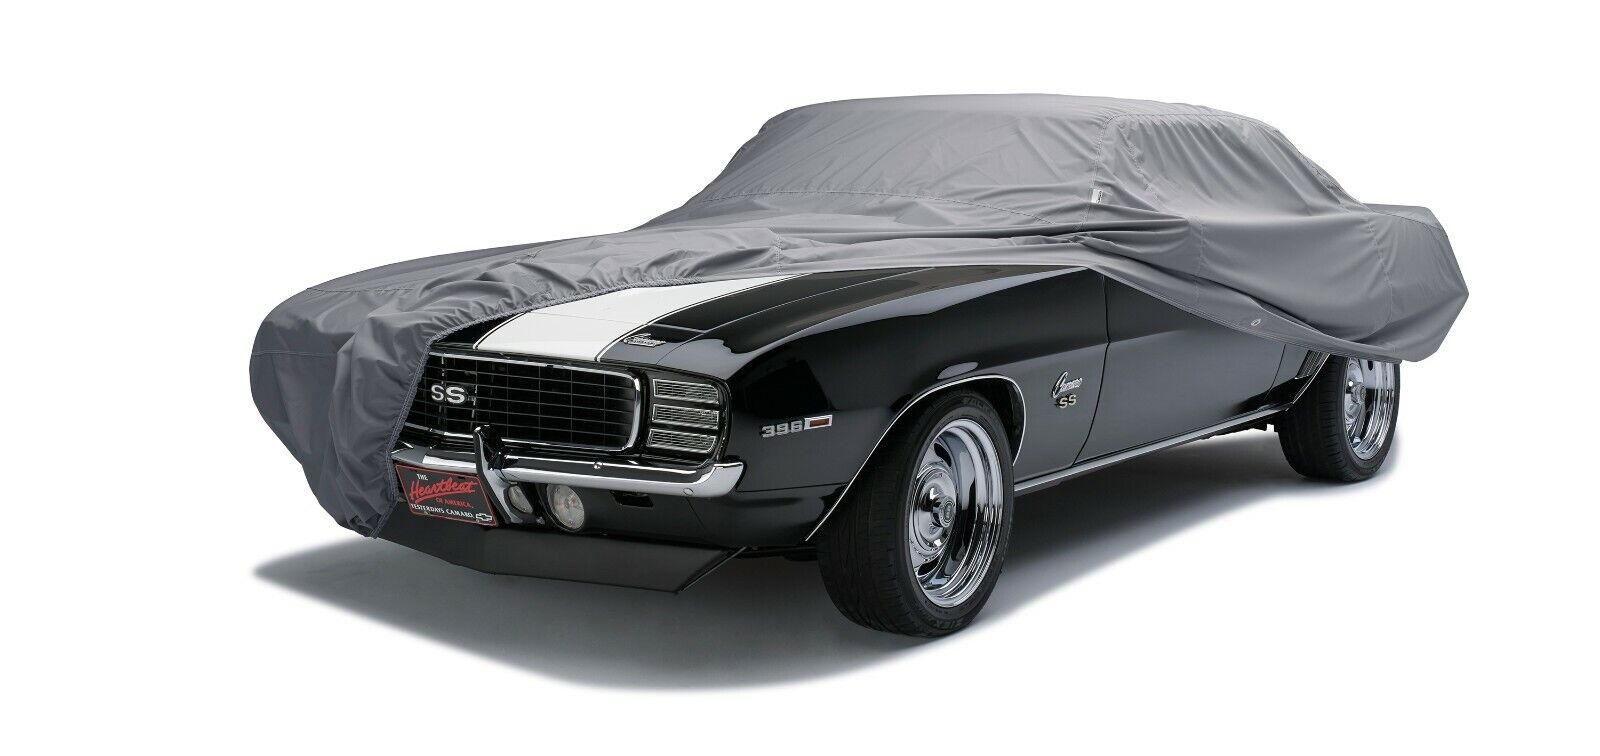 COVERCRAFT Weathershield HP All Weather CAR COVER 1969 Chevrolet Camaro